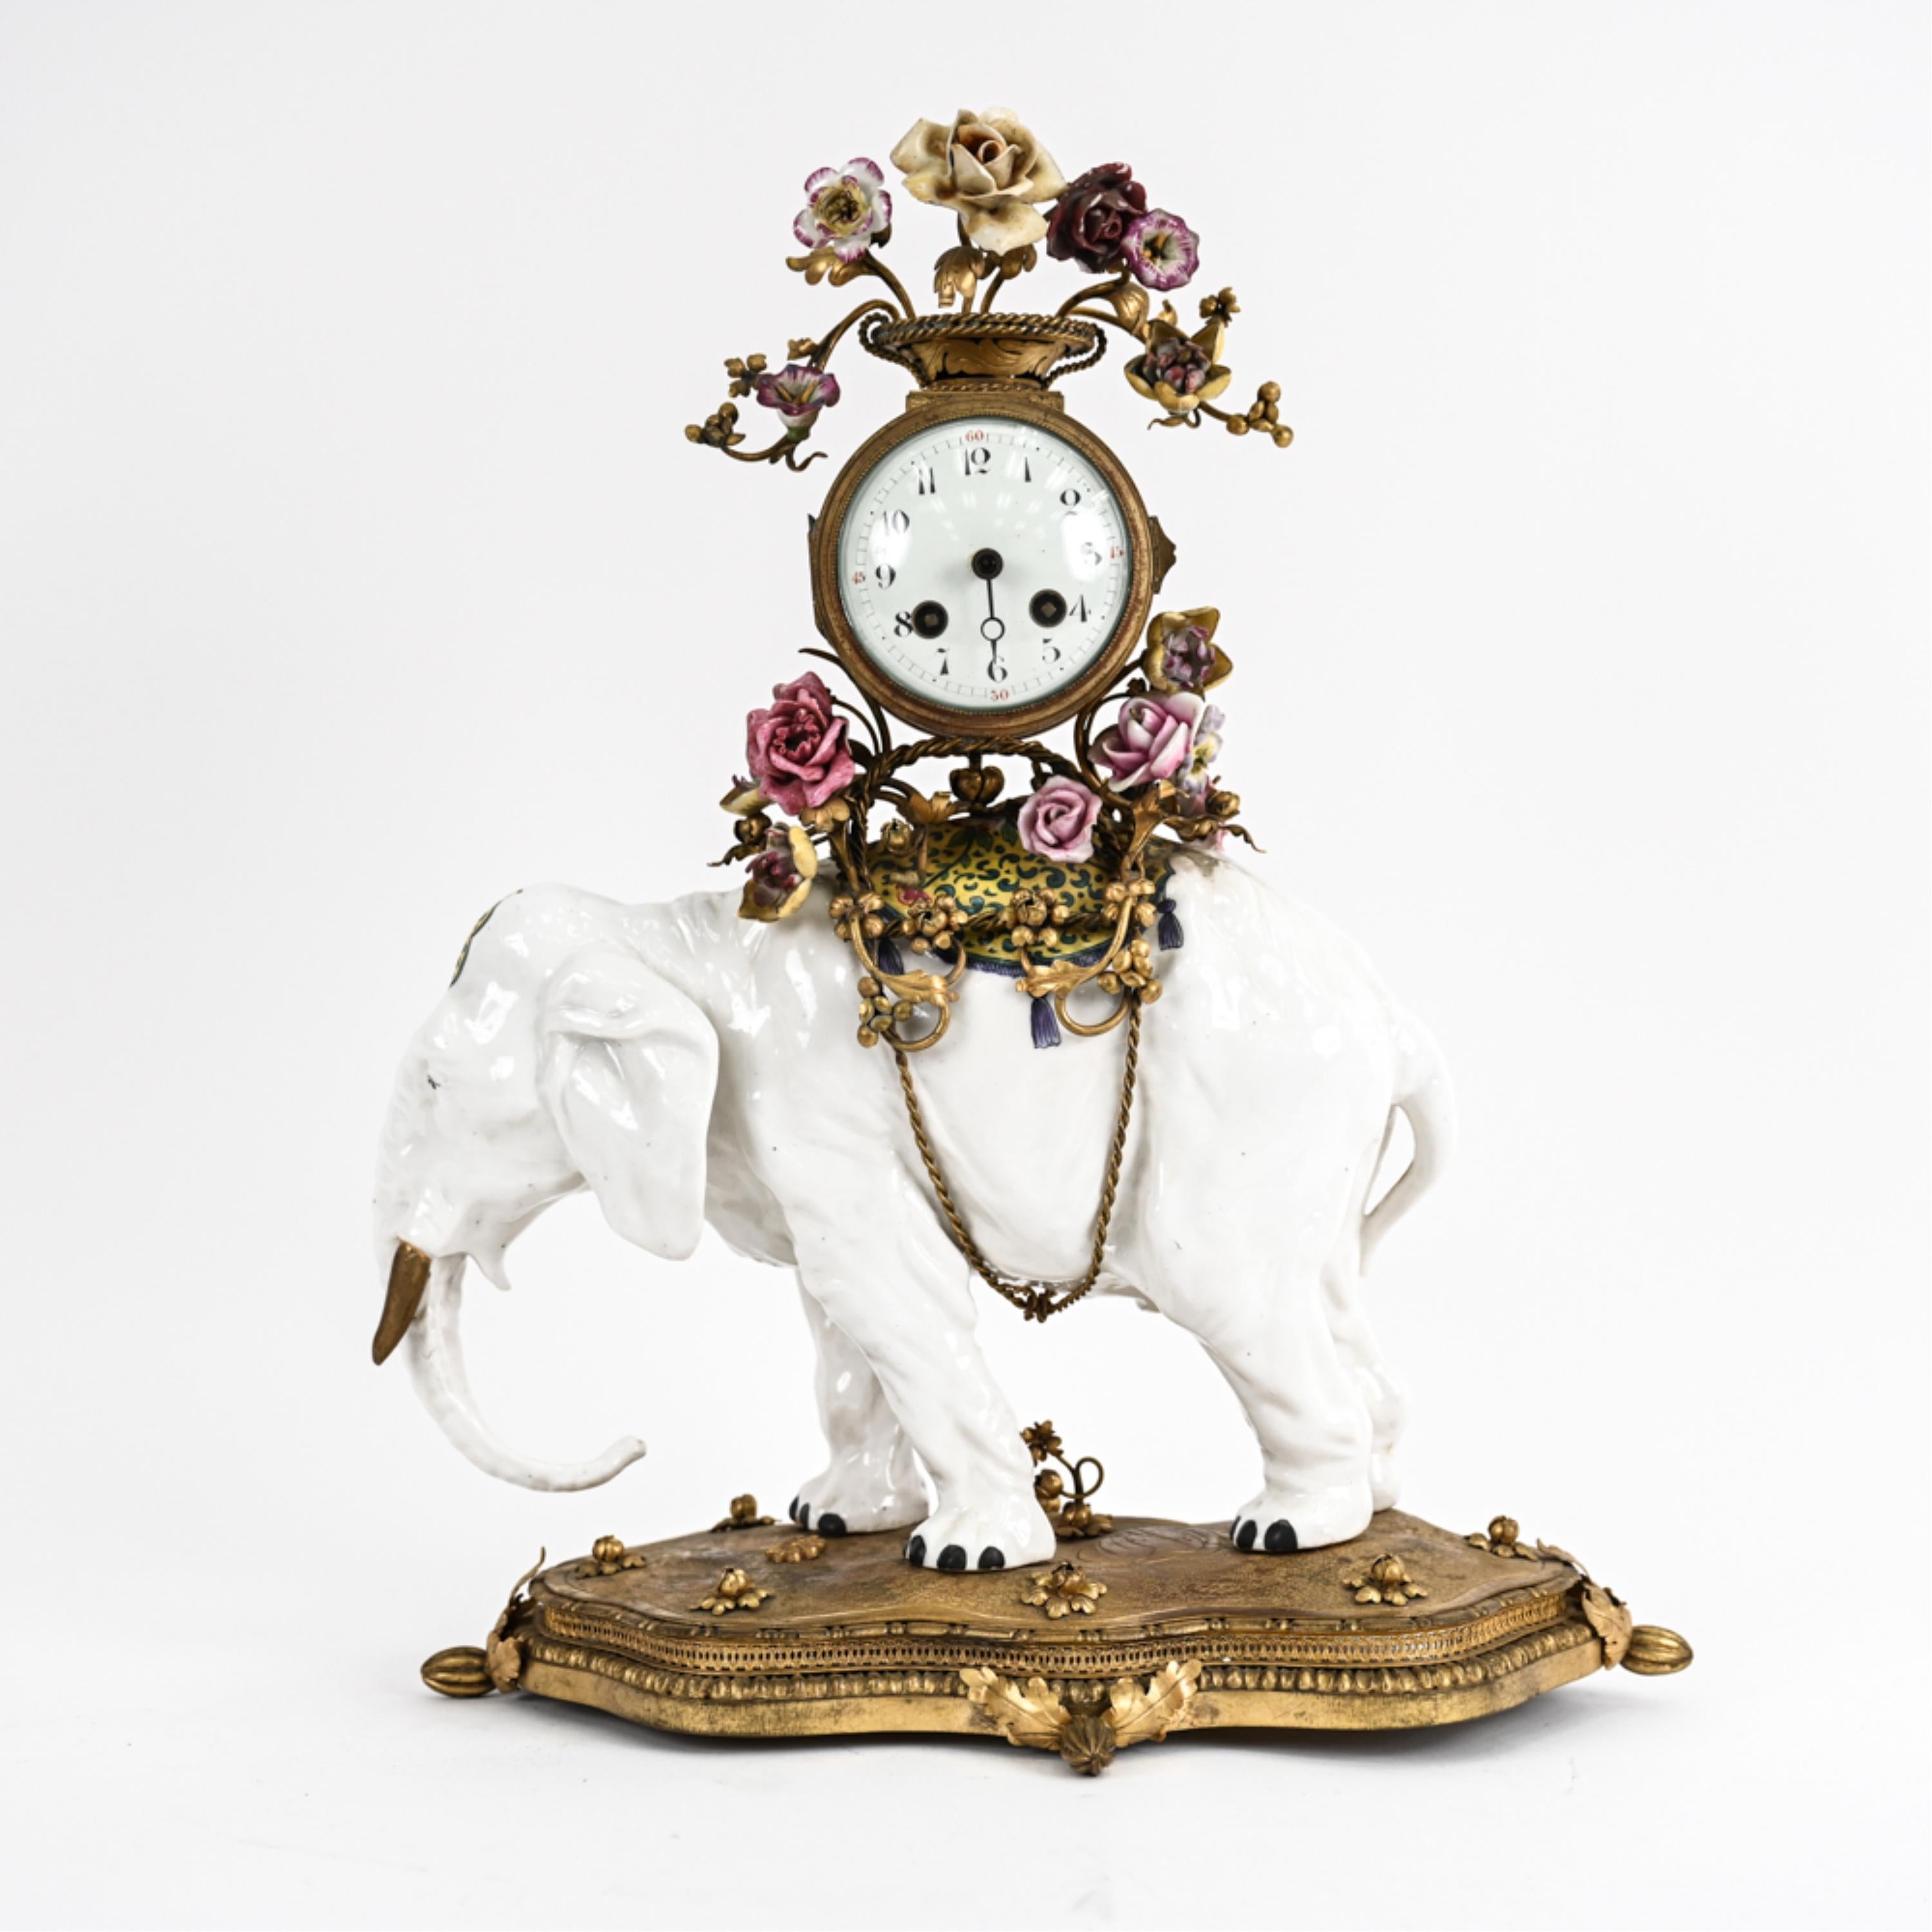 A fine Louis XV-style elephant mantle clock, featuring a porcelain Benjarong-style elephant with hand painted decoration and gilded tusks, mounted atop a naturalistic gilt bronze base and carrying a French drum-form clock adorned with porcelain and